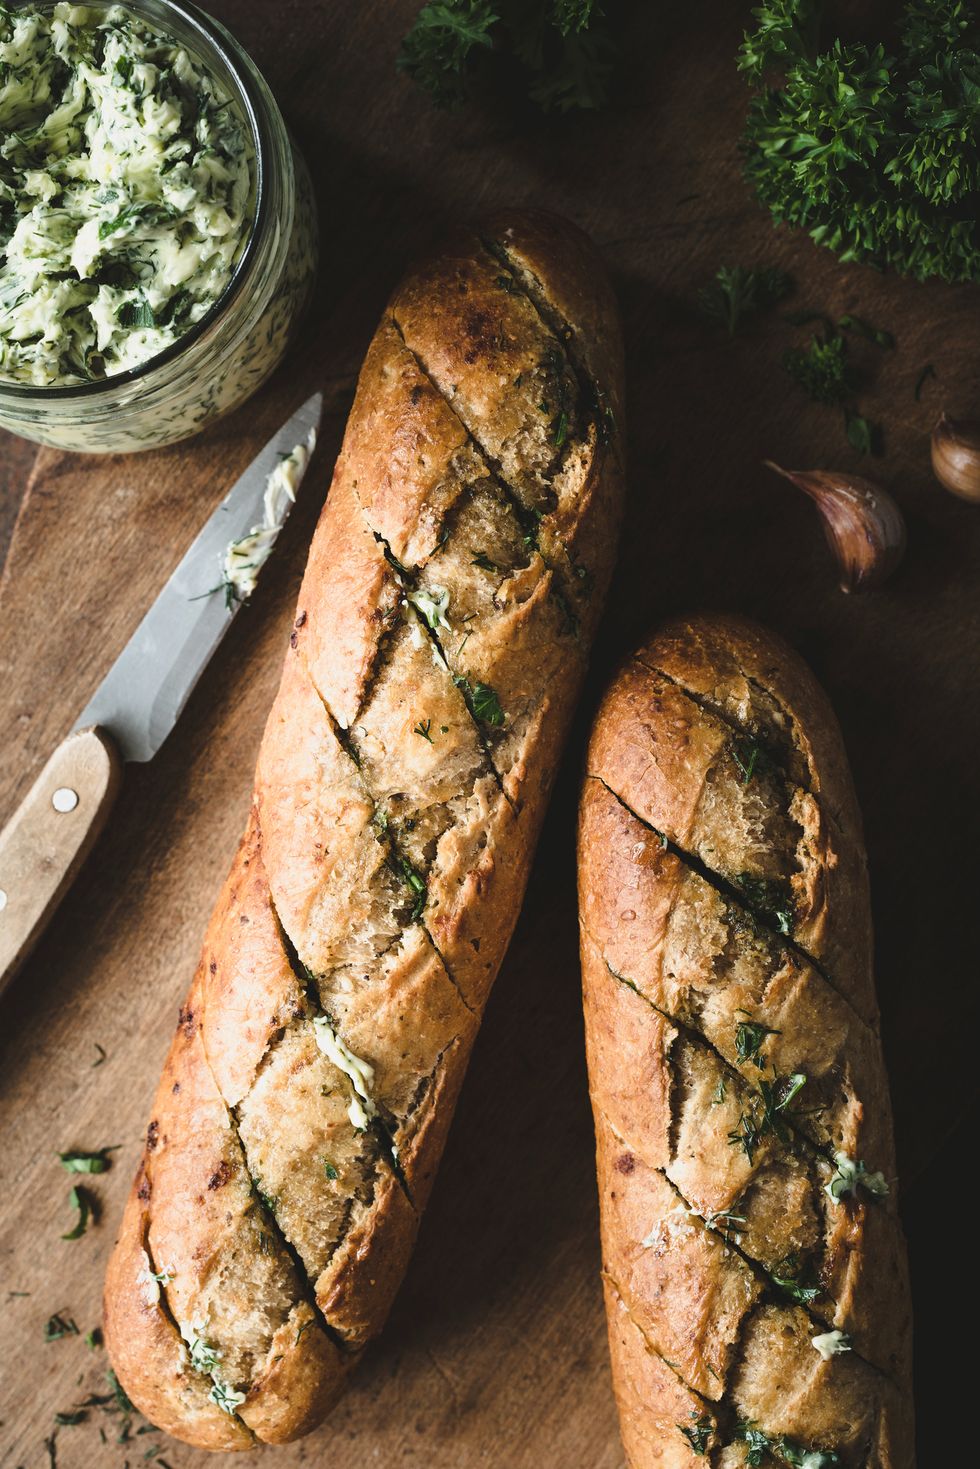 garlic butter baked baguette compound butter with herbs and garlic rustic food composition